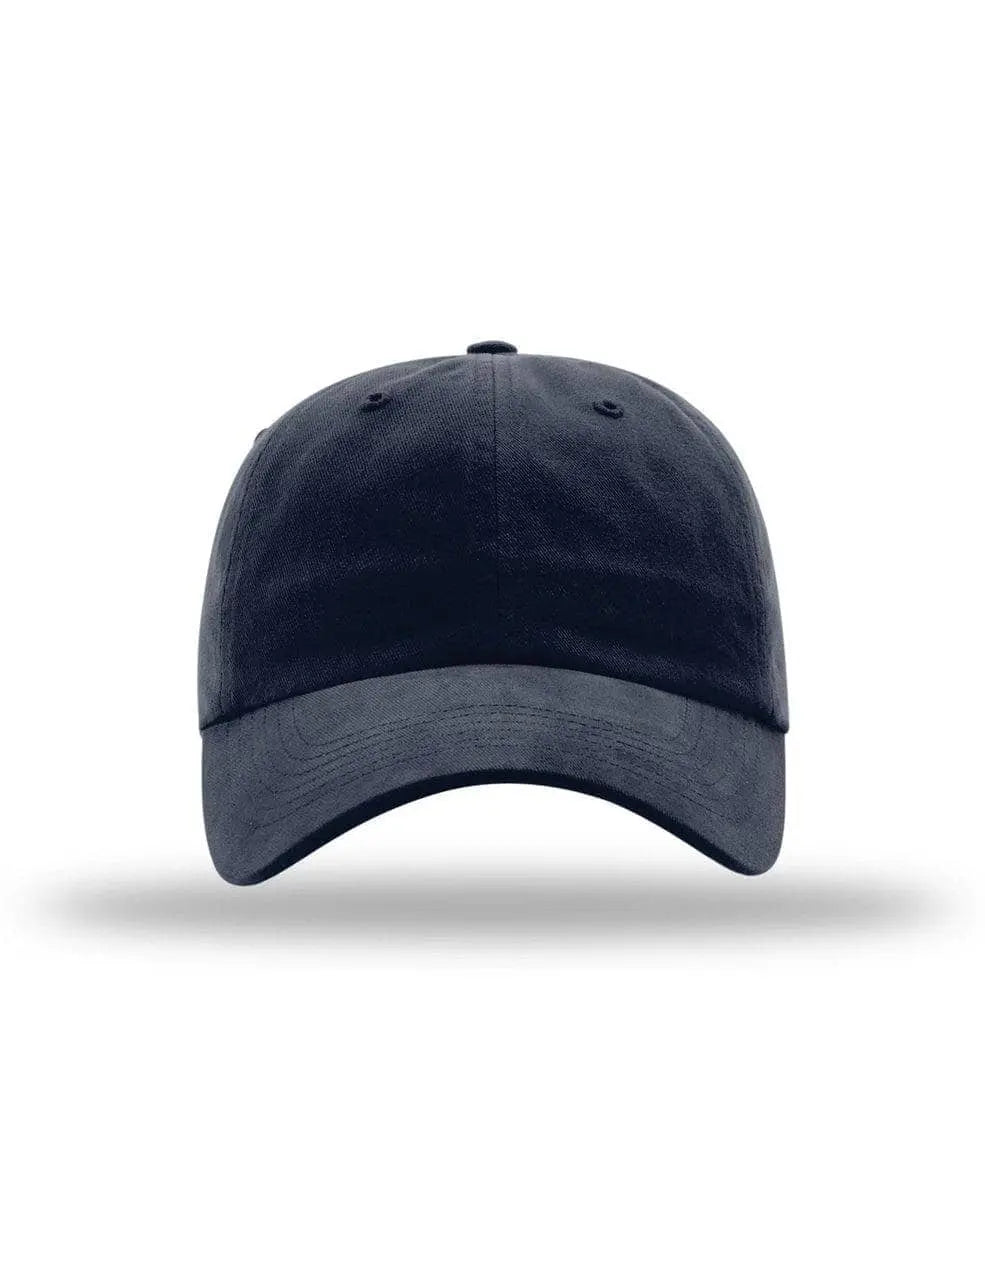 RICHARDSON - R55 DAD HAT - NAVY - Becker Safety and Supply